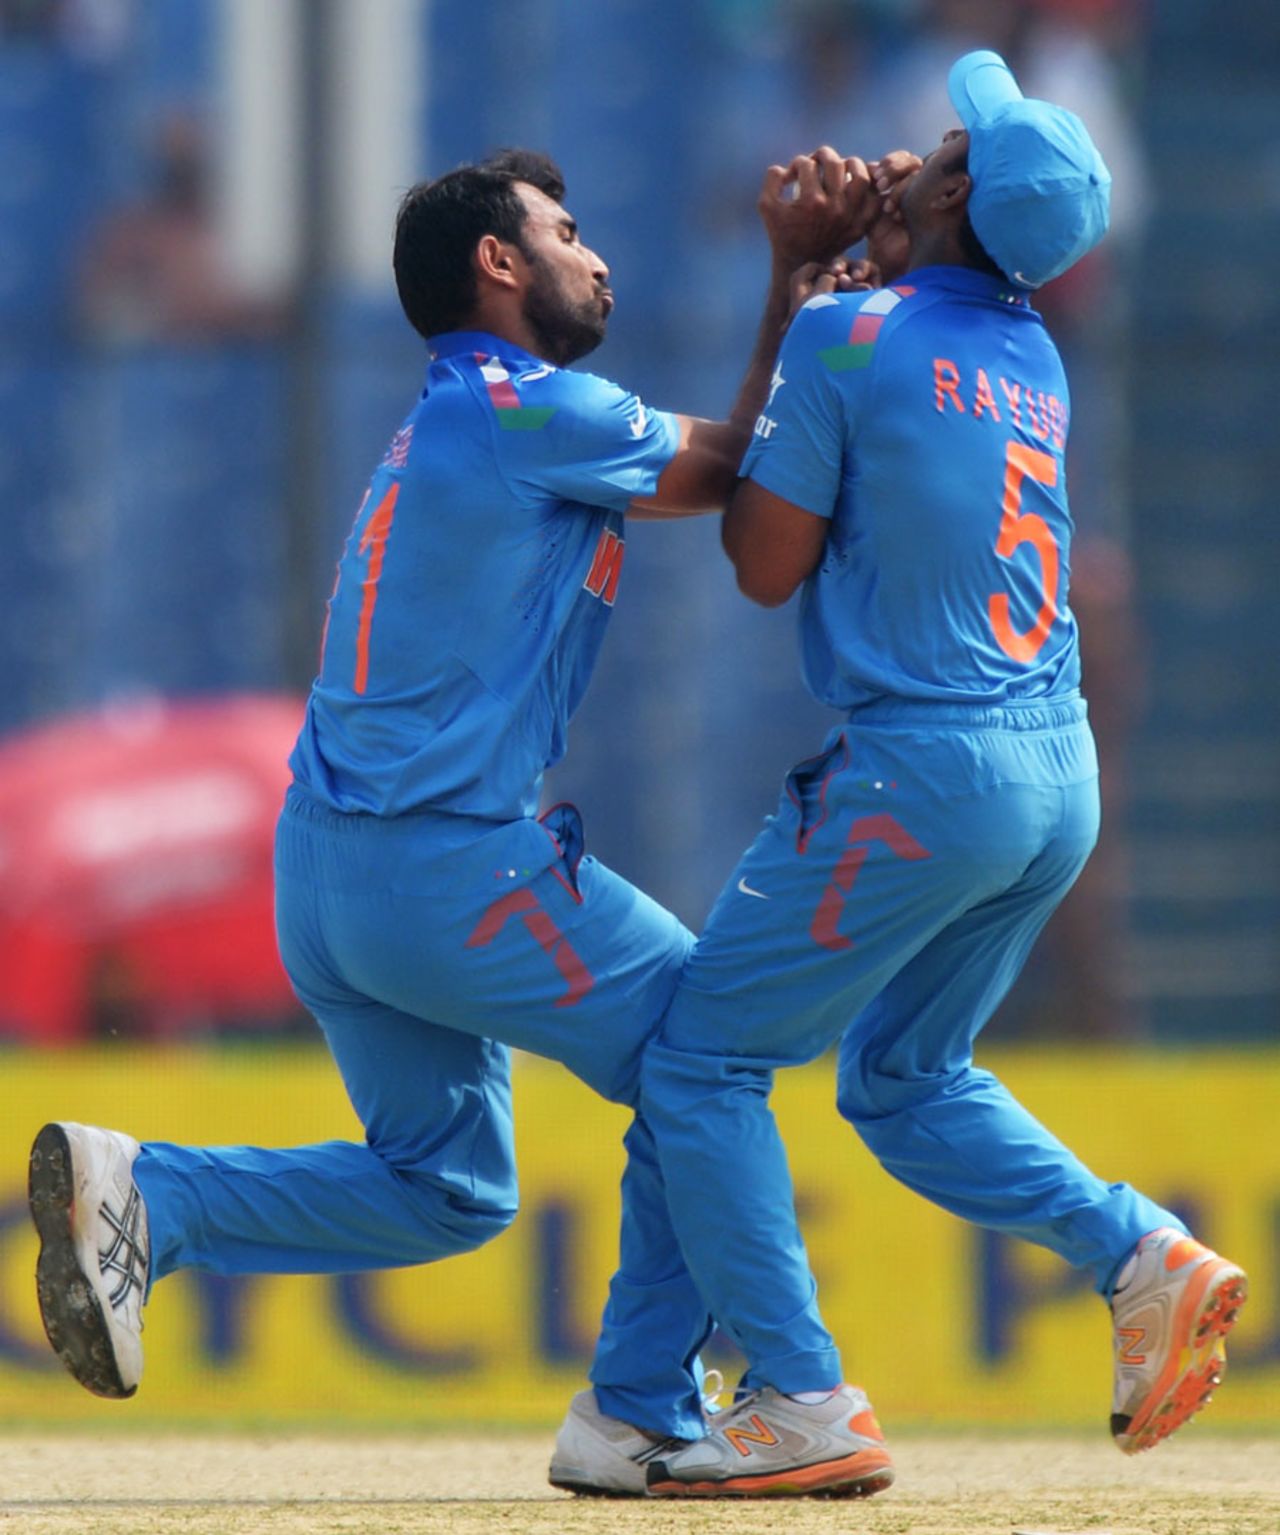 Mohammed Shami and Ambati Rayudu collide while Shami attempts a catch, Bangladesh v India, Asia Cup 2014, Fatullah, February 26, 2014